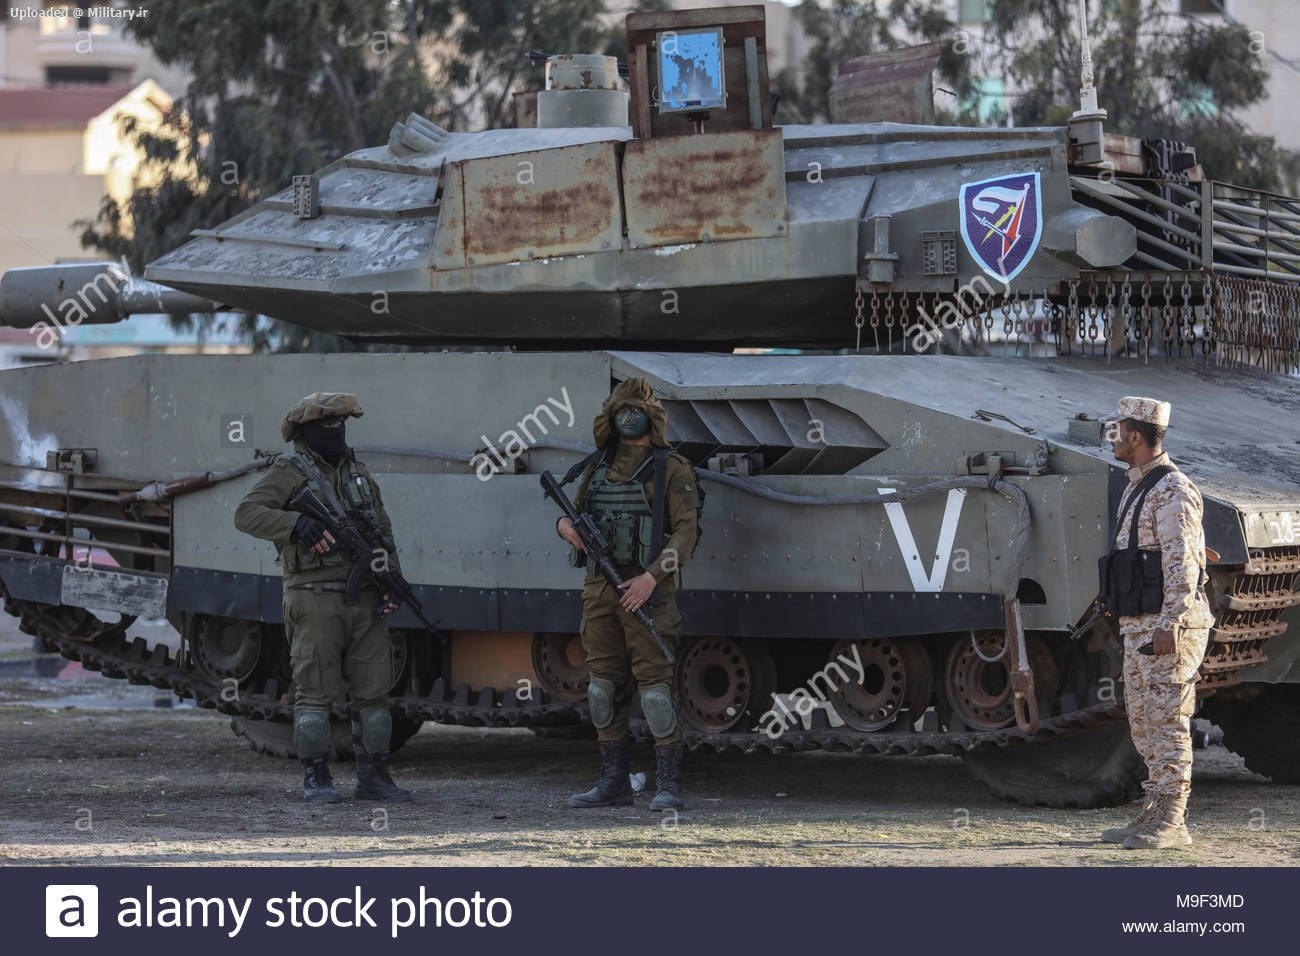 militants-of-izz-ad-din-al-qassam-brigades-the-military-wing-of-the-palestinian-hamas-islamist-movement-stand-guard-next-to-a-life-size-model-of-an-israeli-merkava-tank-during-a-large-scale-dri.jpg